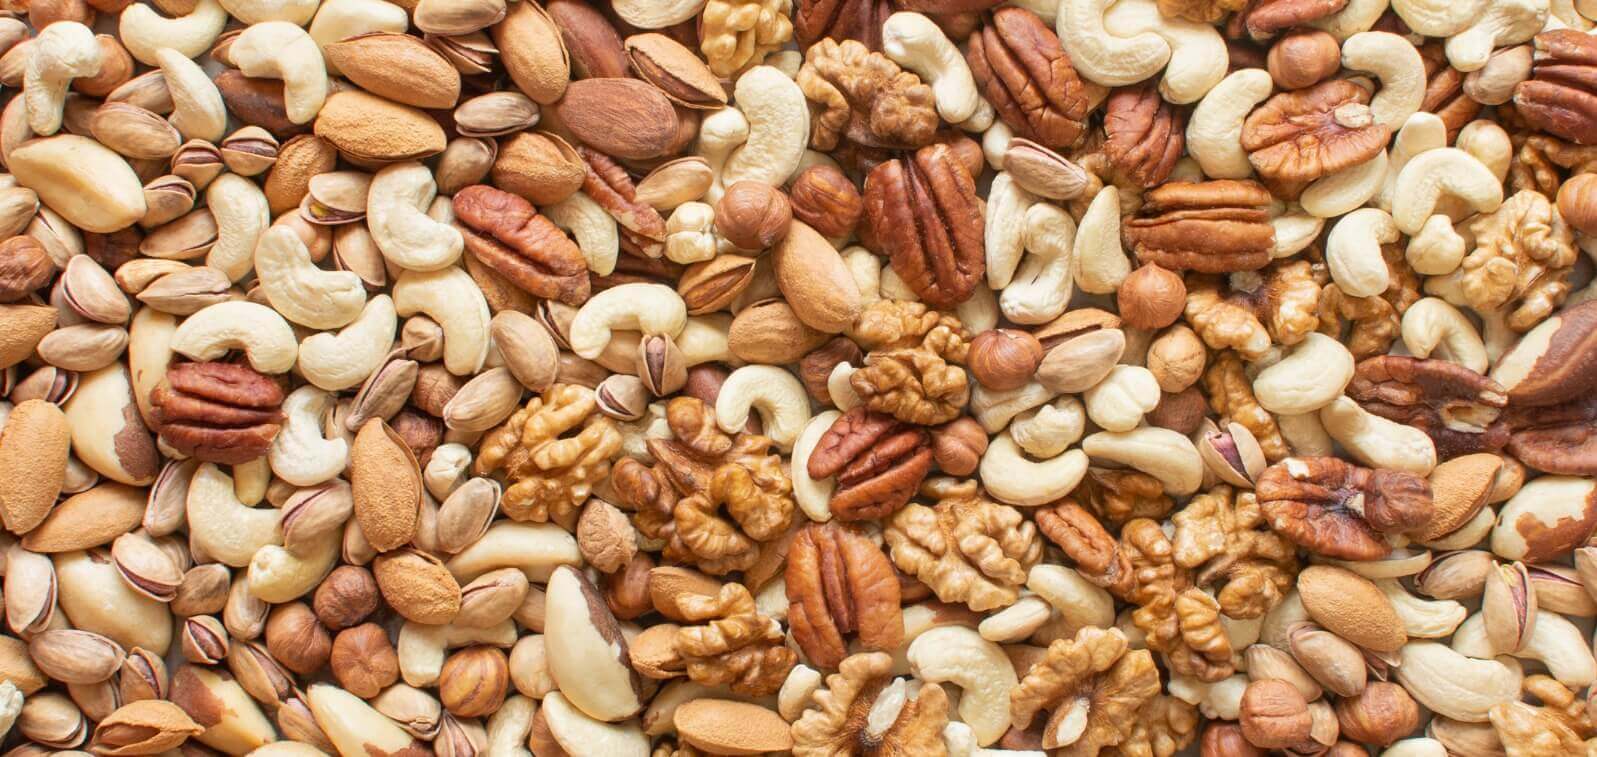 How to Choose the Right Nuts for You